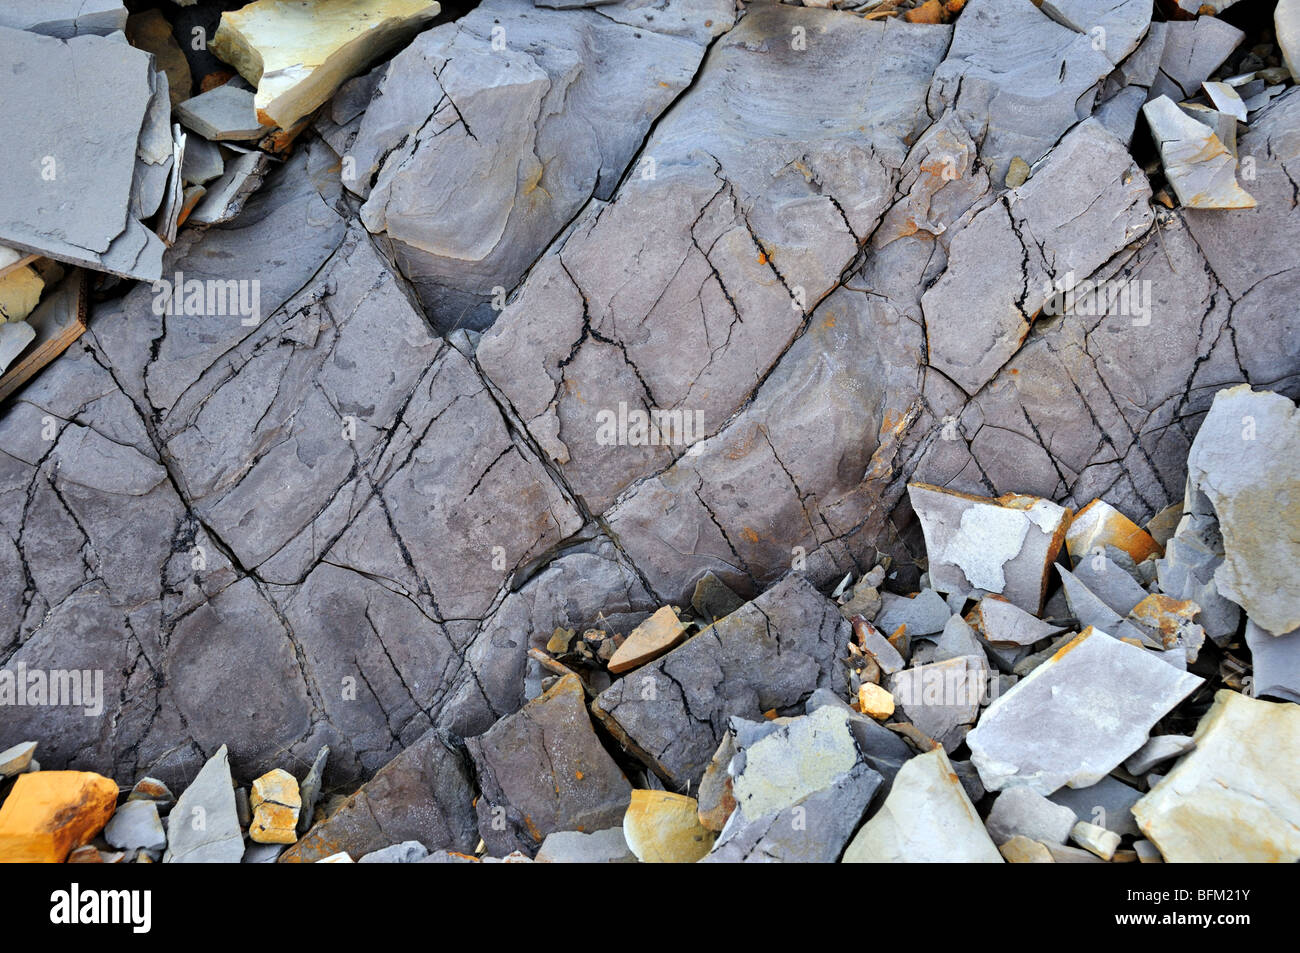 Fractured surface of shale rock, Oklahoma, USA. Stock Photo